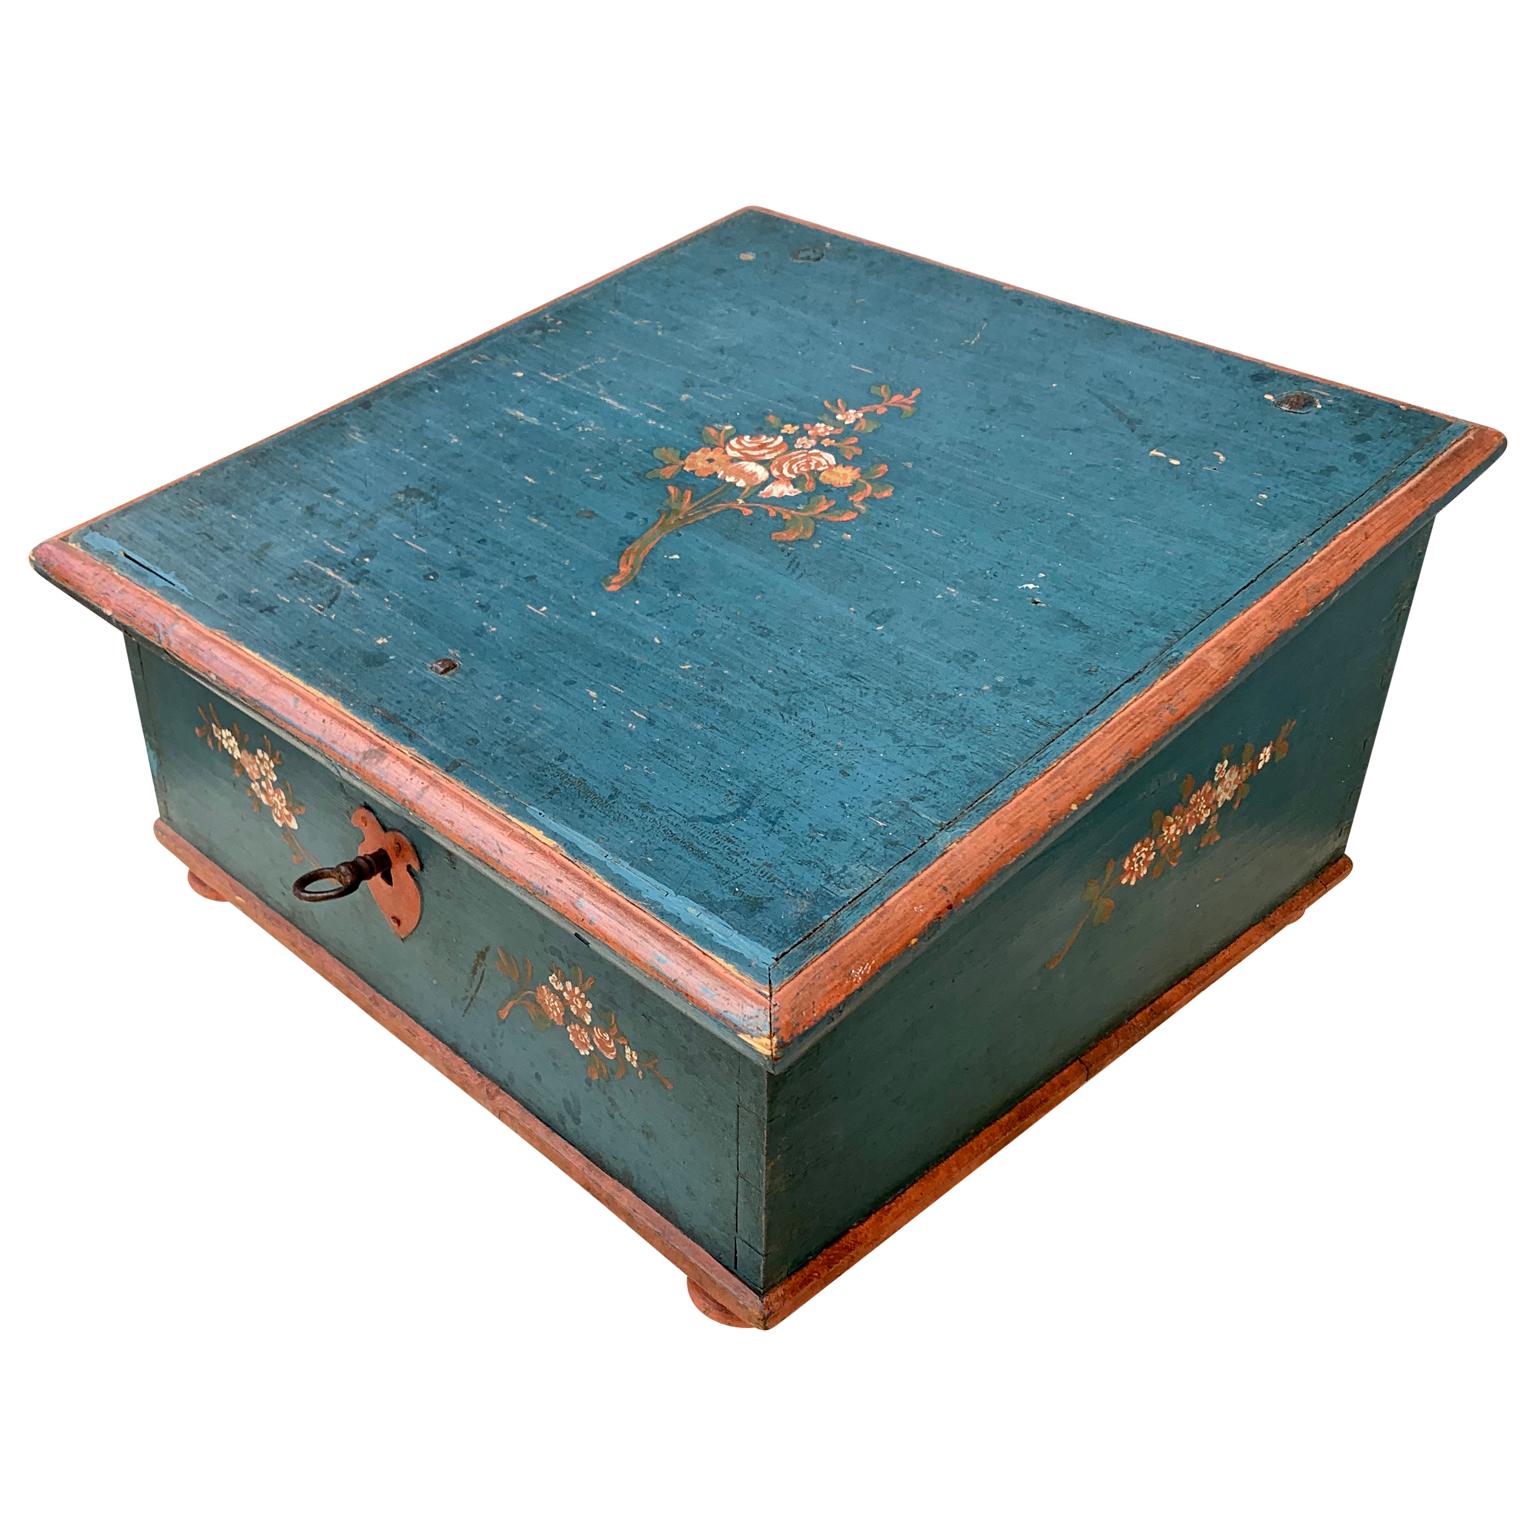 A Swedish blue and red painted pine-wood box from the Gustavian period or the early 19th Century. The hand painted flower decoration has still the remaining of the rococo period kind of painting floral pattern. This Scandinavian folk art box is